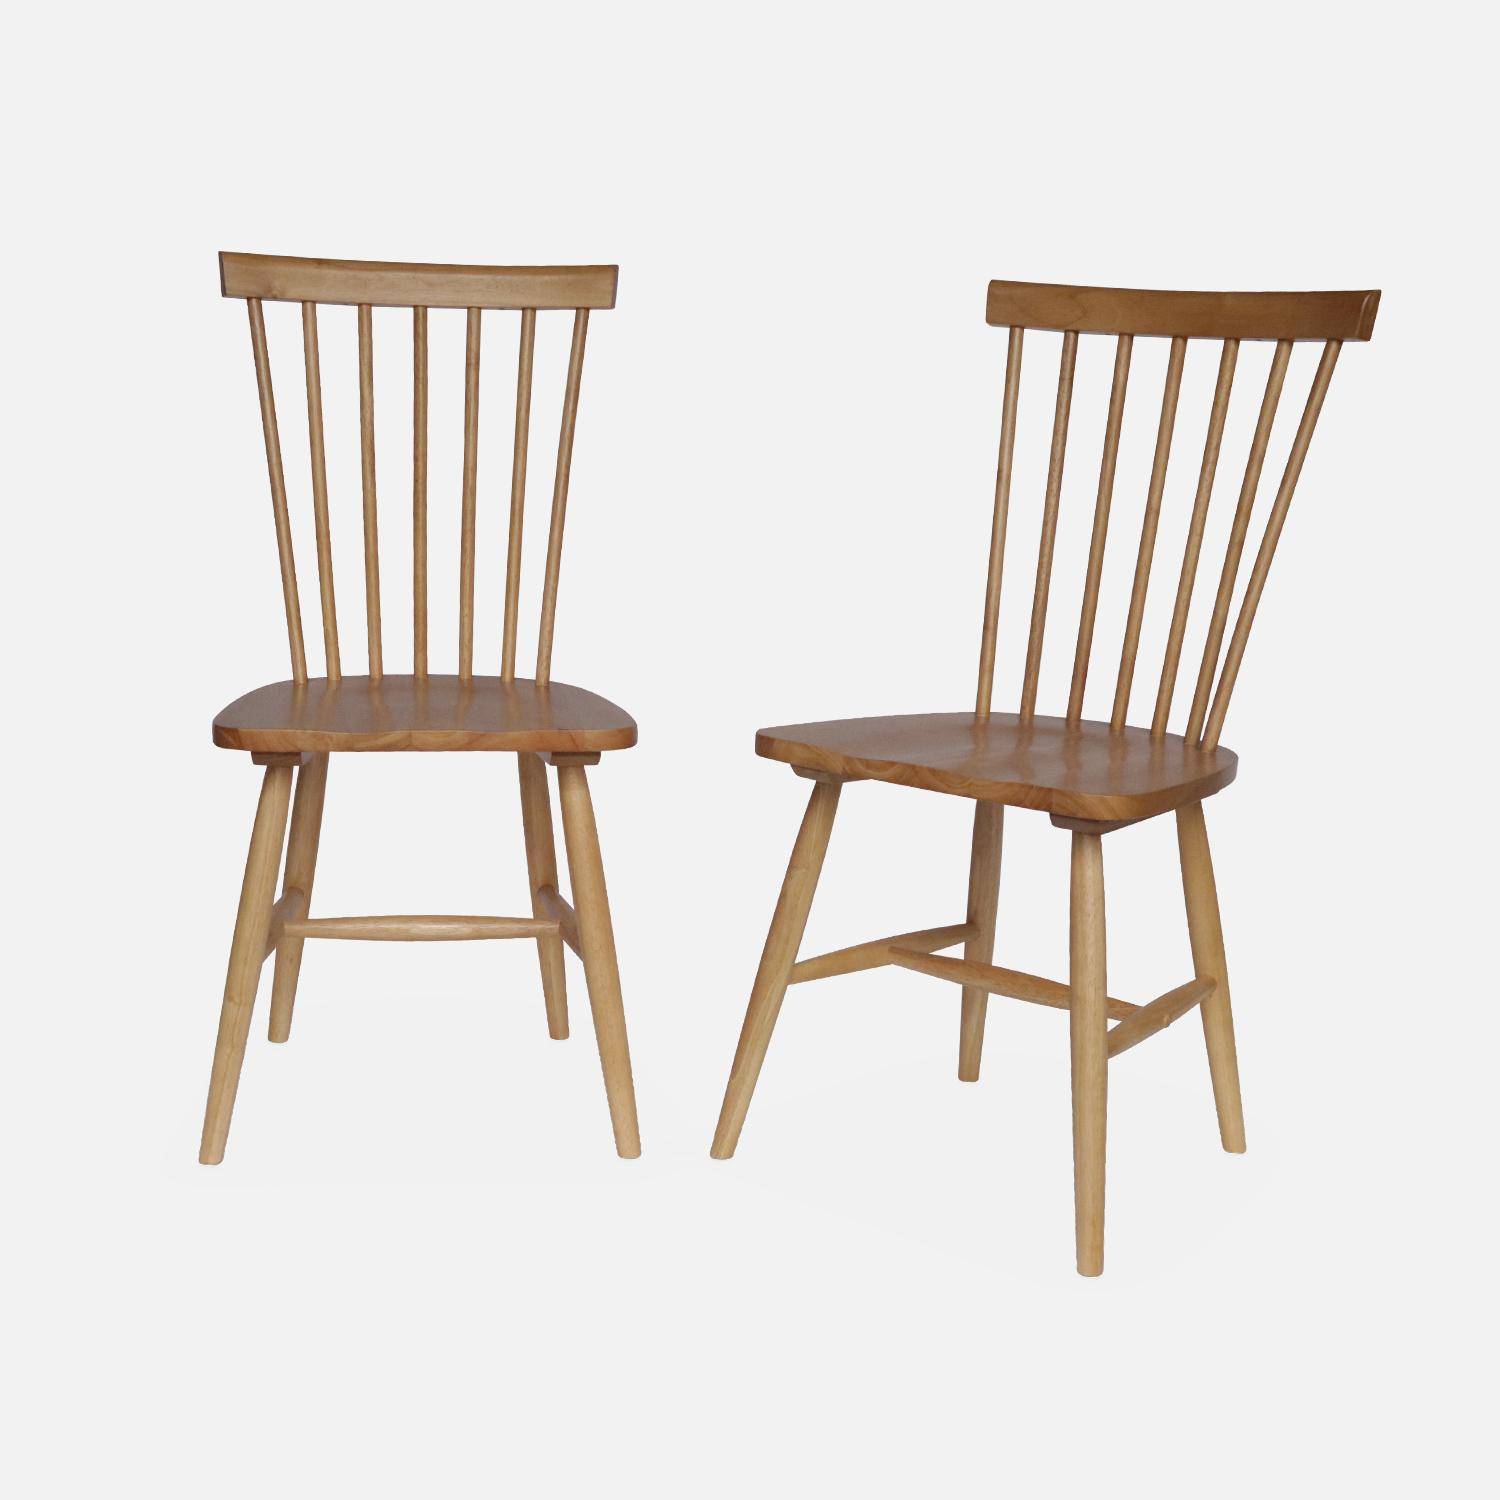 Pair of dining room chairs in Hevea wood,  L49 x W44 x H90 cm, Natural Photo3